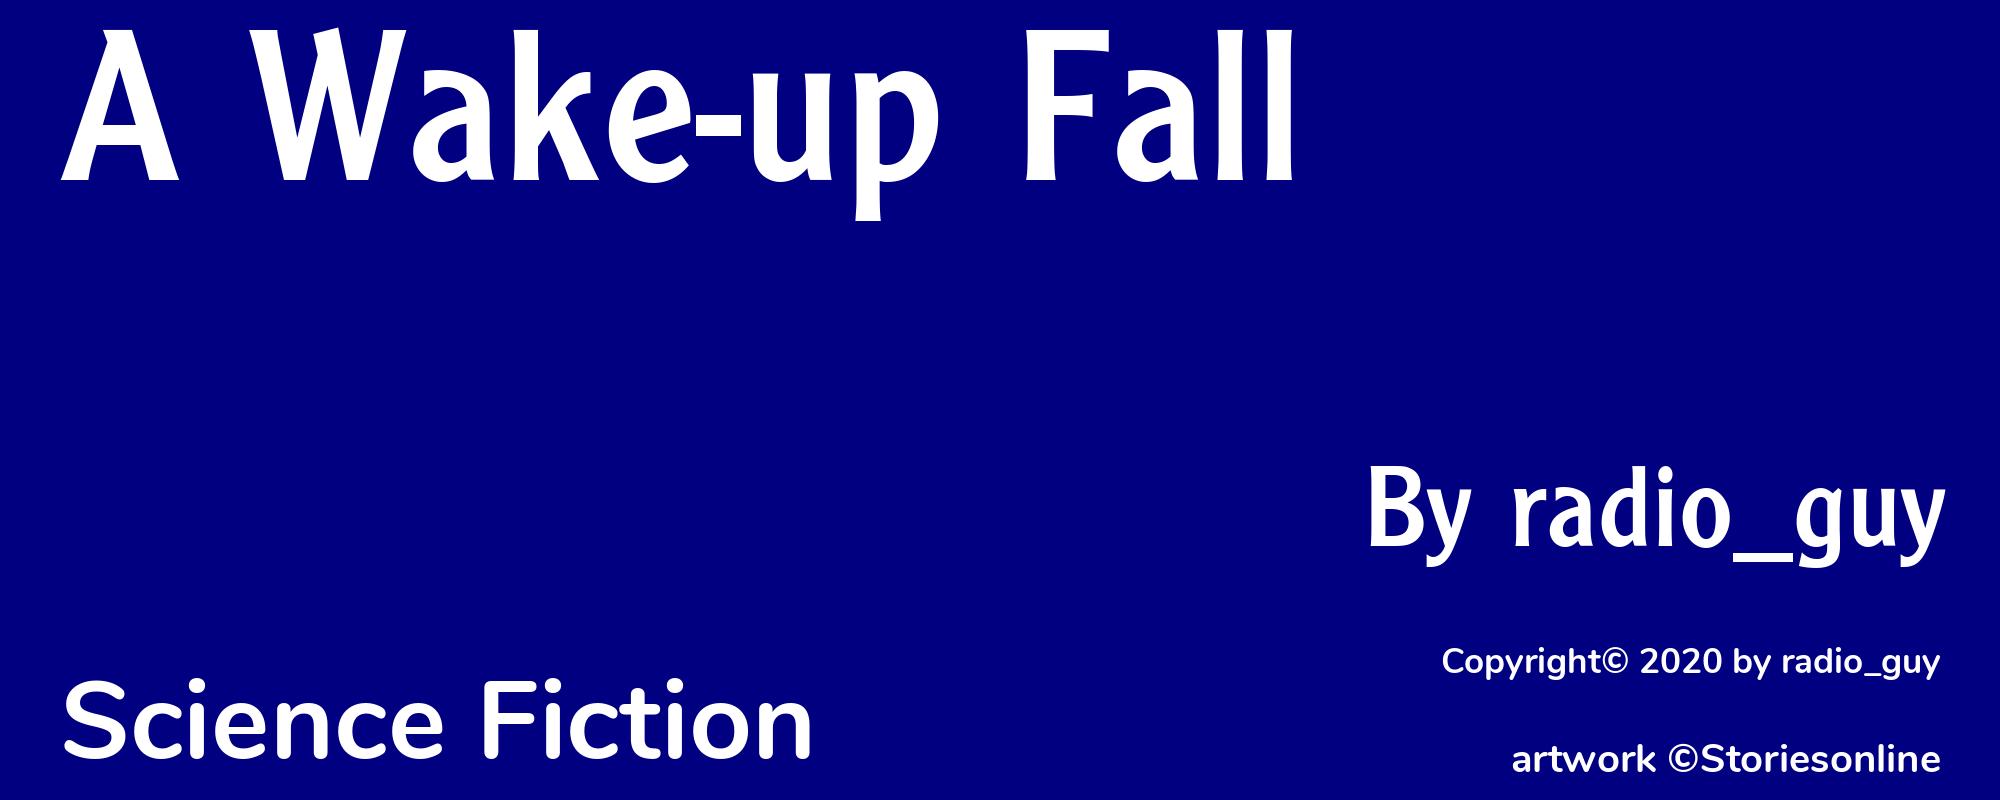 A Wake-up Fall - Cover